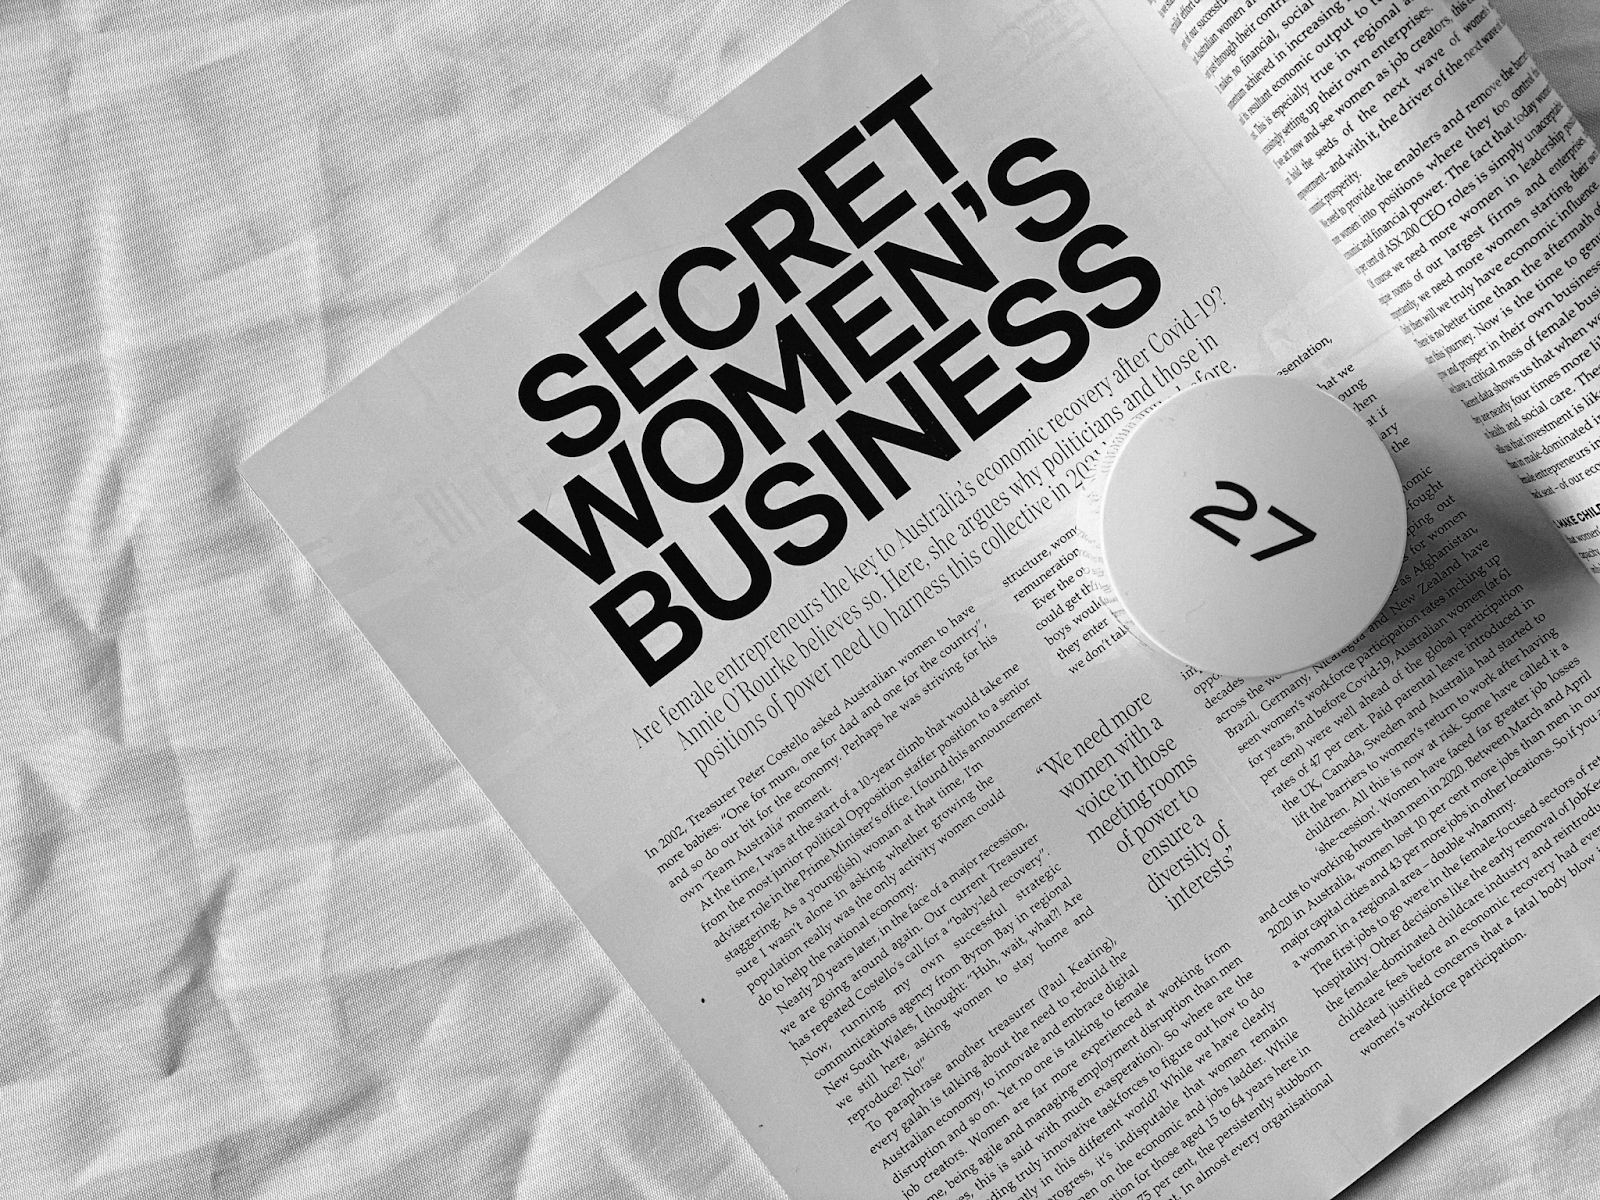 A magazine cover featuring the title "Secret Women's Business"